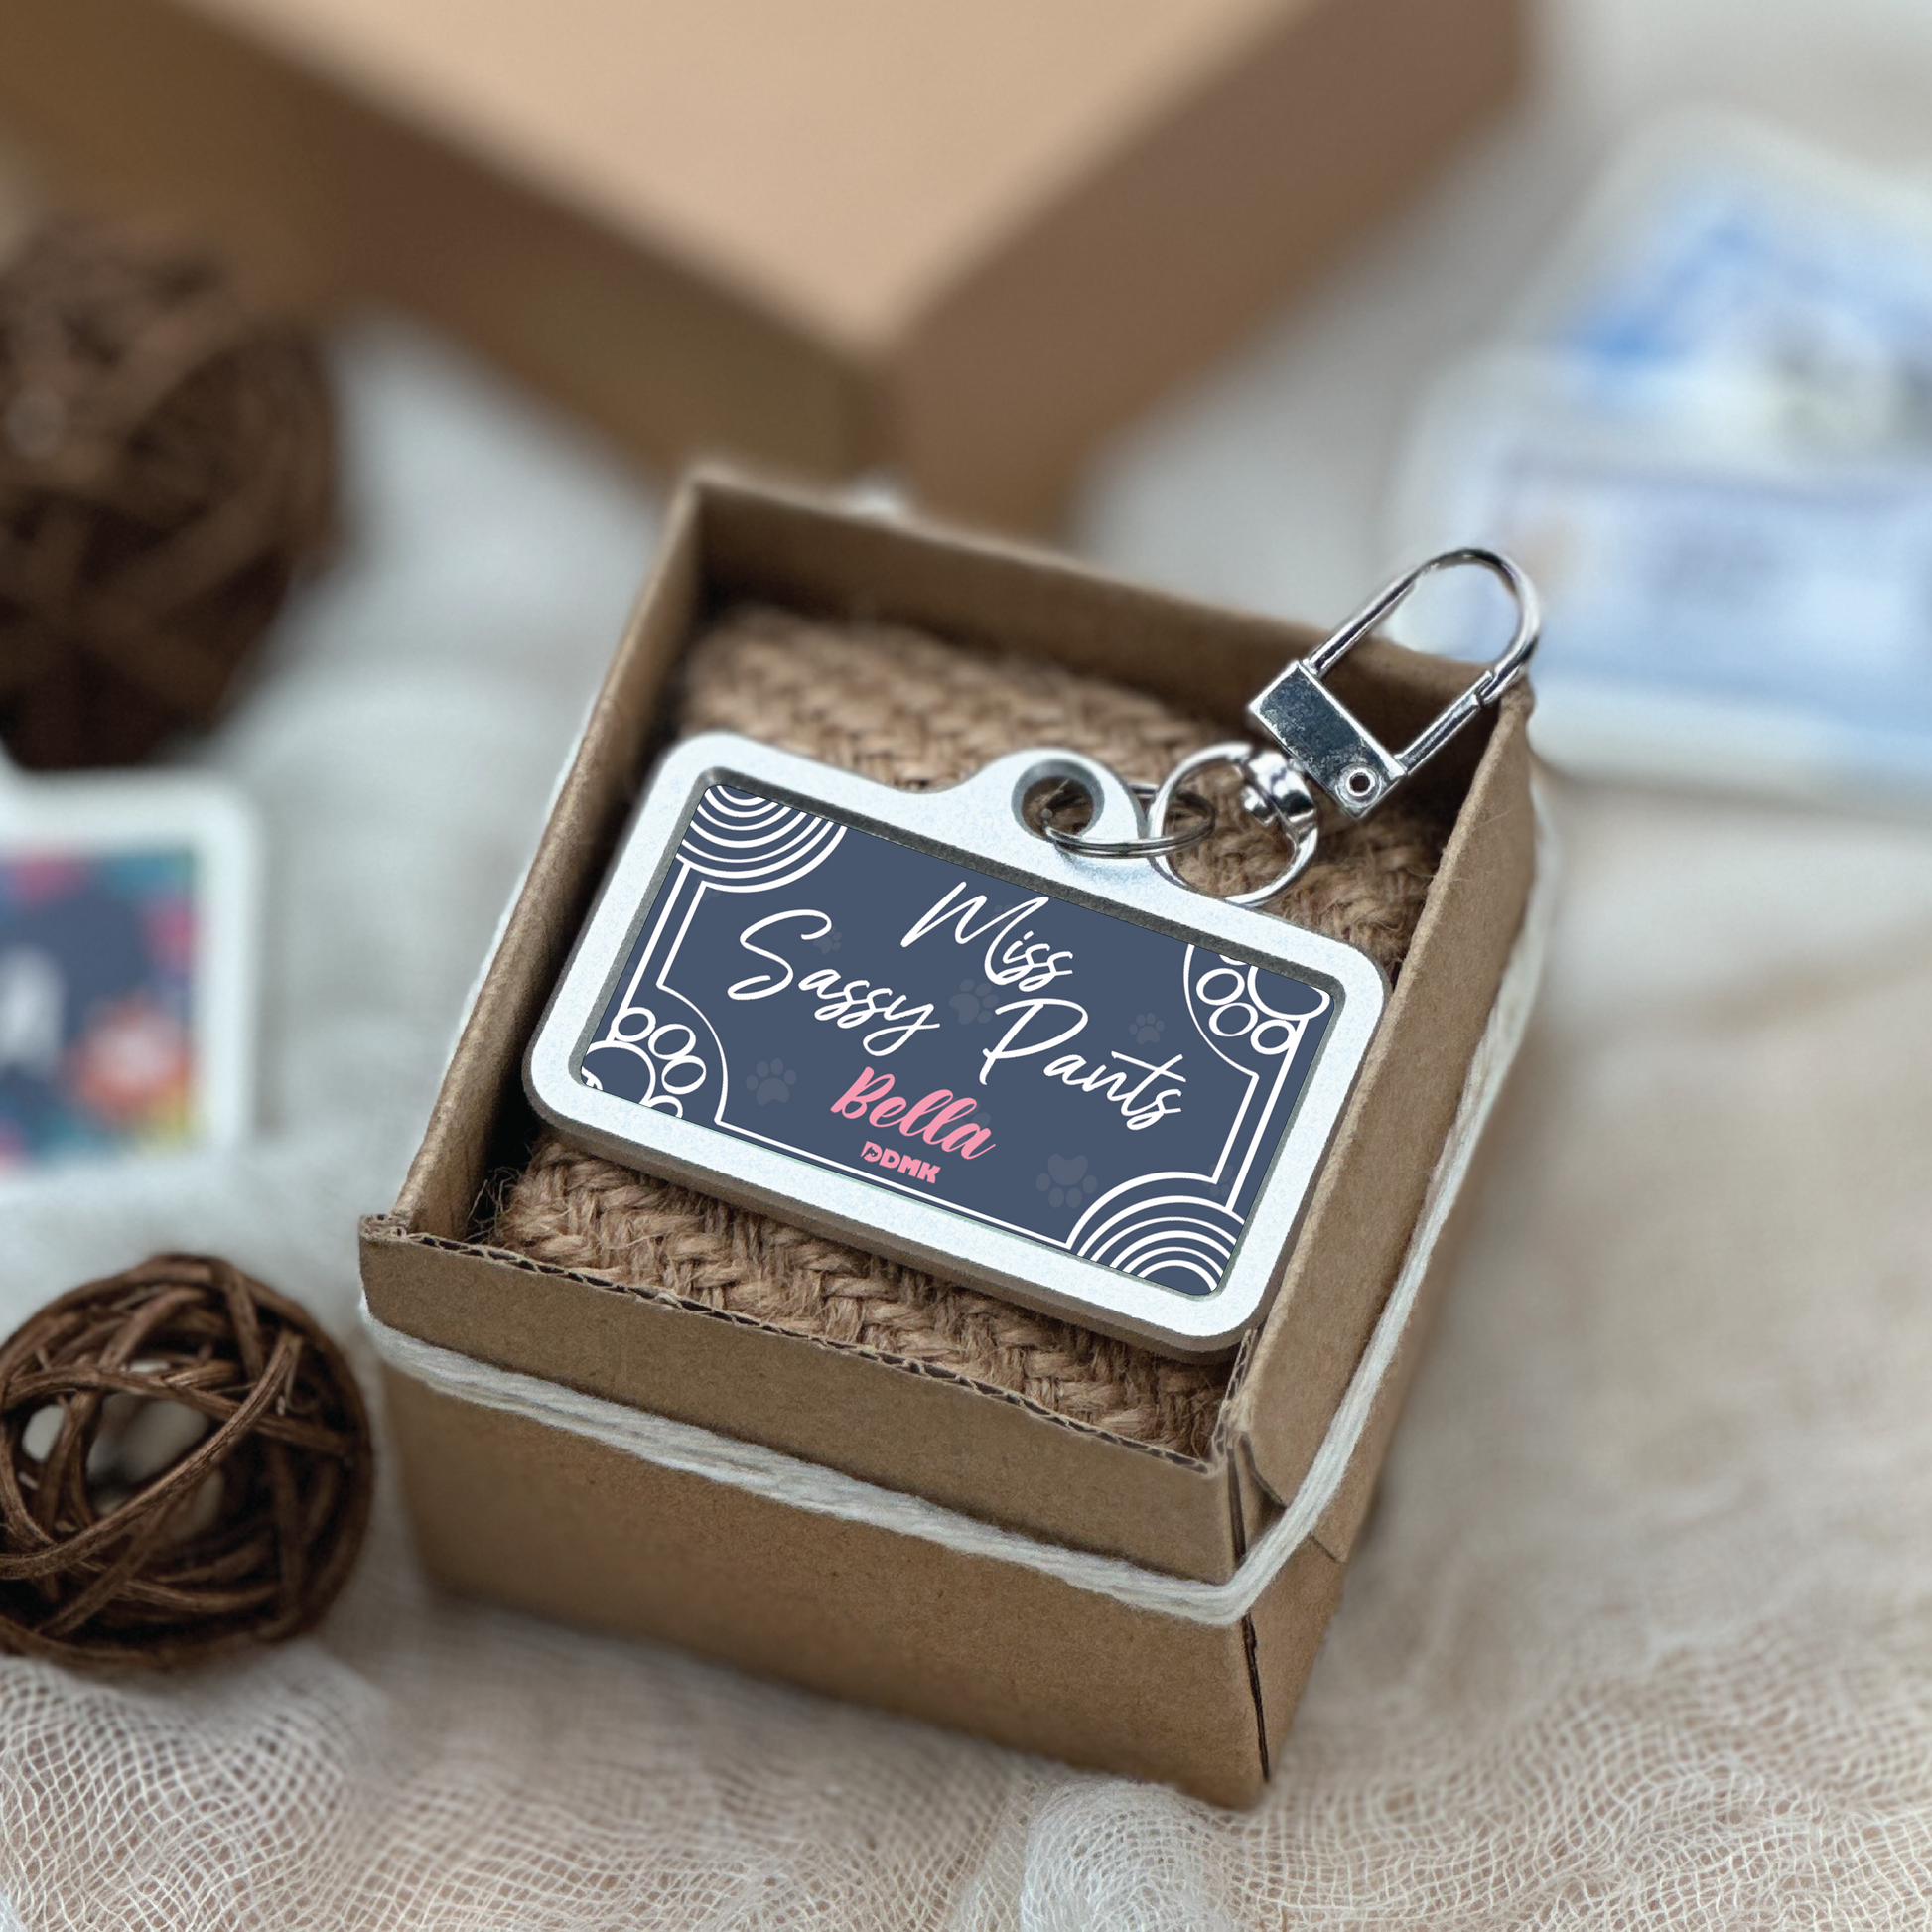 DDMK™ Tags for LOVE™- Miss Sassy pants